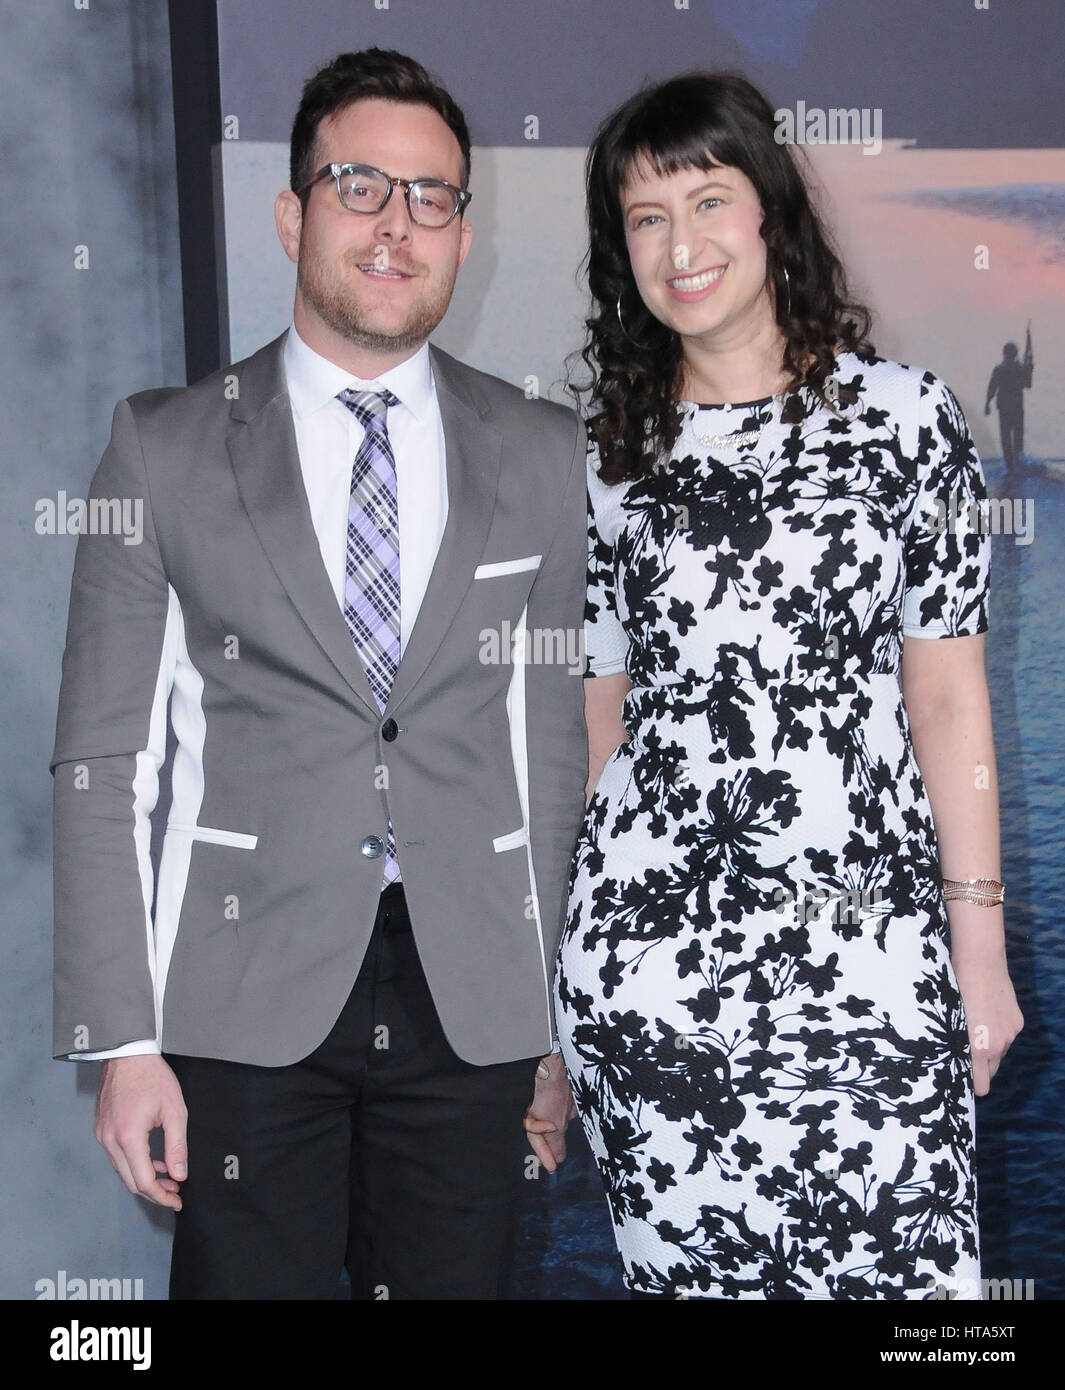 Hollywood, CA, USA. 8th Mar, 2017. 08 March 2017 - IHollywood, California - Max Borenstein, Sofiya Goldshteyn. Premiere Of Warner Bros. Pictures' ''Kong: Skull Island'' held at The Dolby Theater in Hollywood. Photo Credit: Birdie Thompson/AdMedia Credit: Birdie Thompson/AdMedia/ZUMA Wire/Alamy Live News Stock Photo